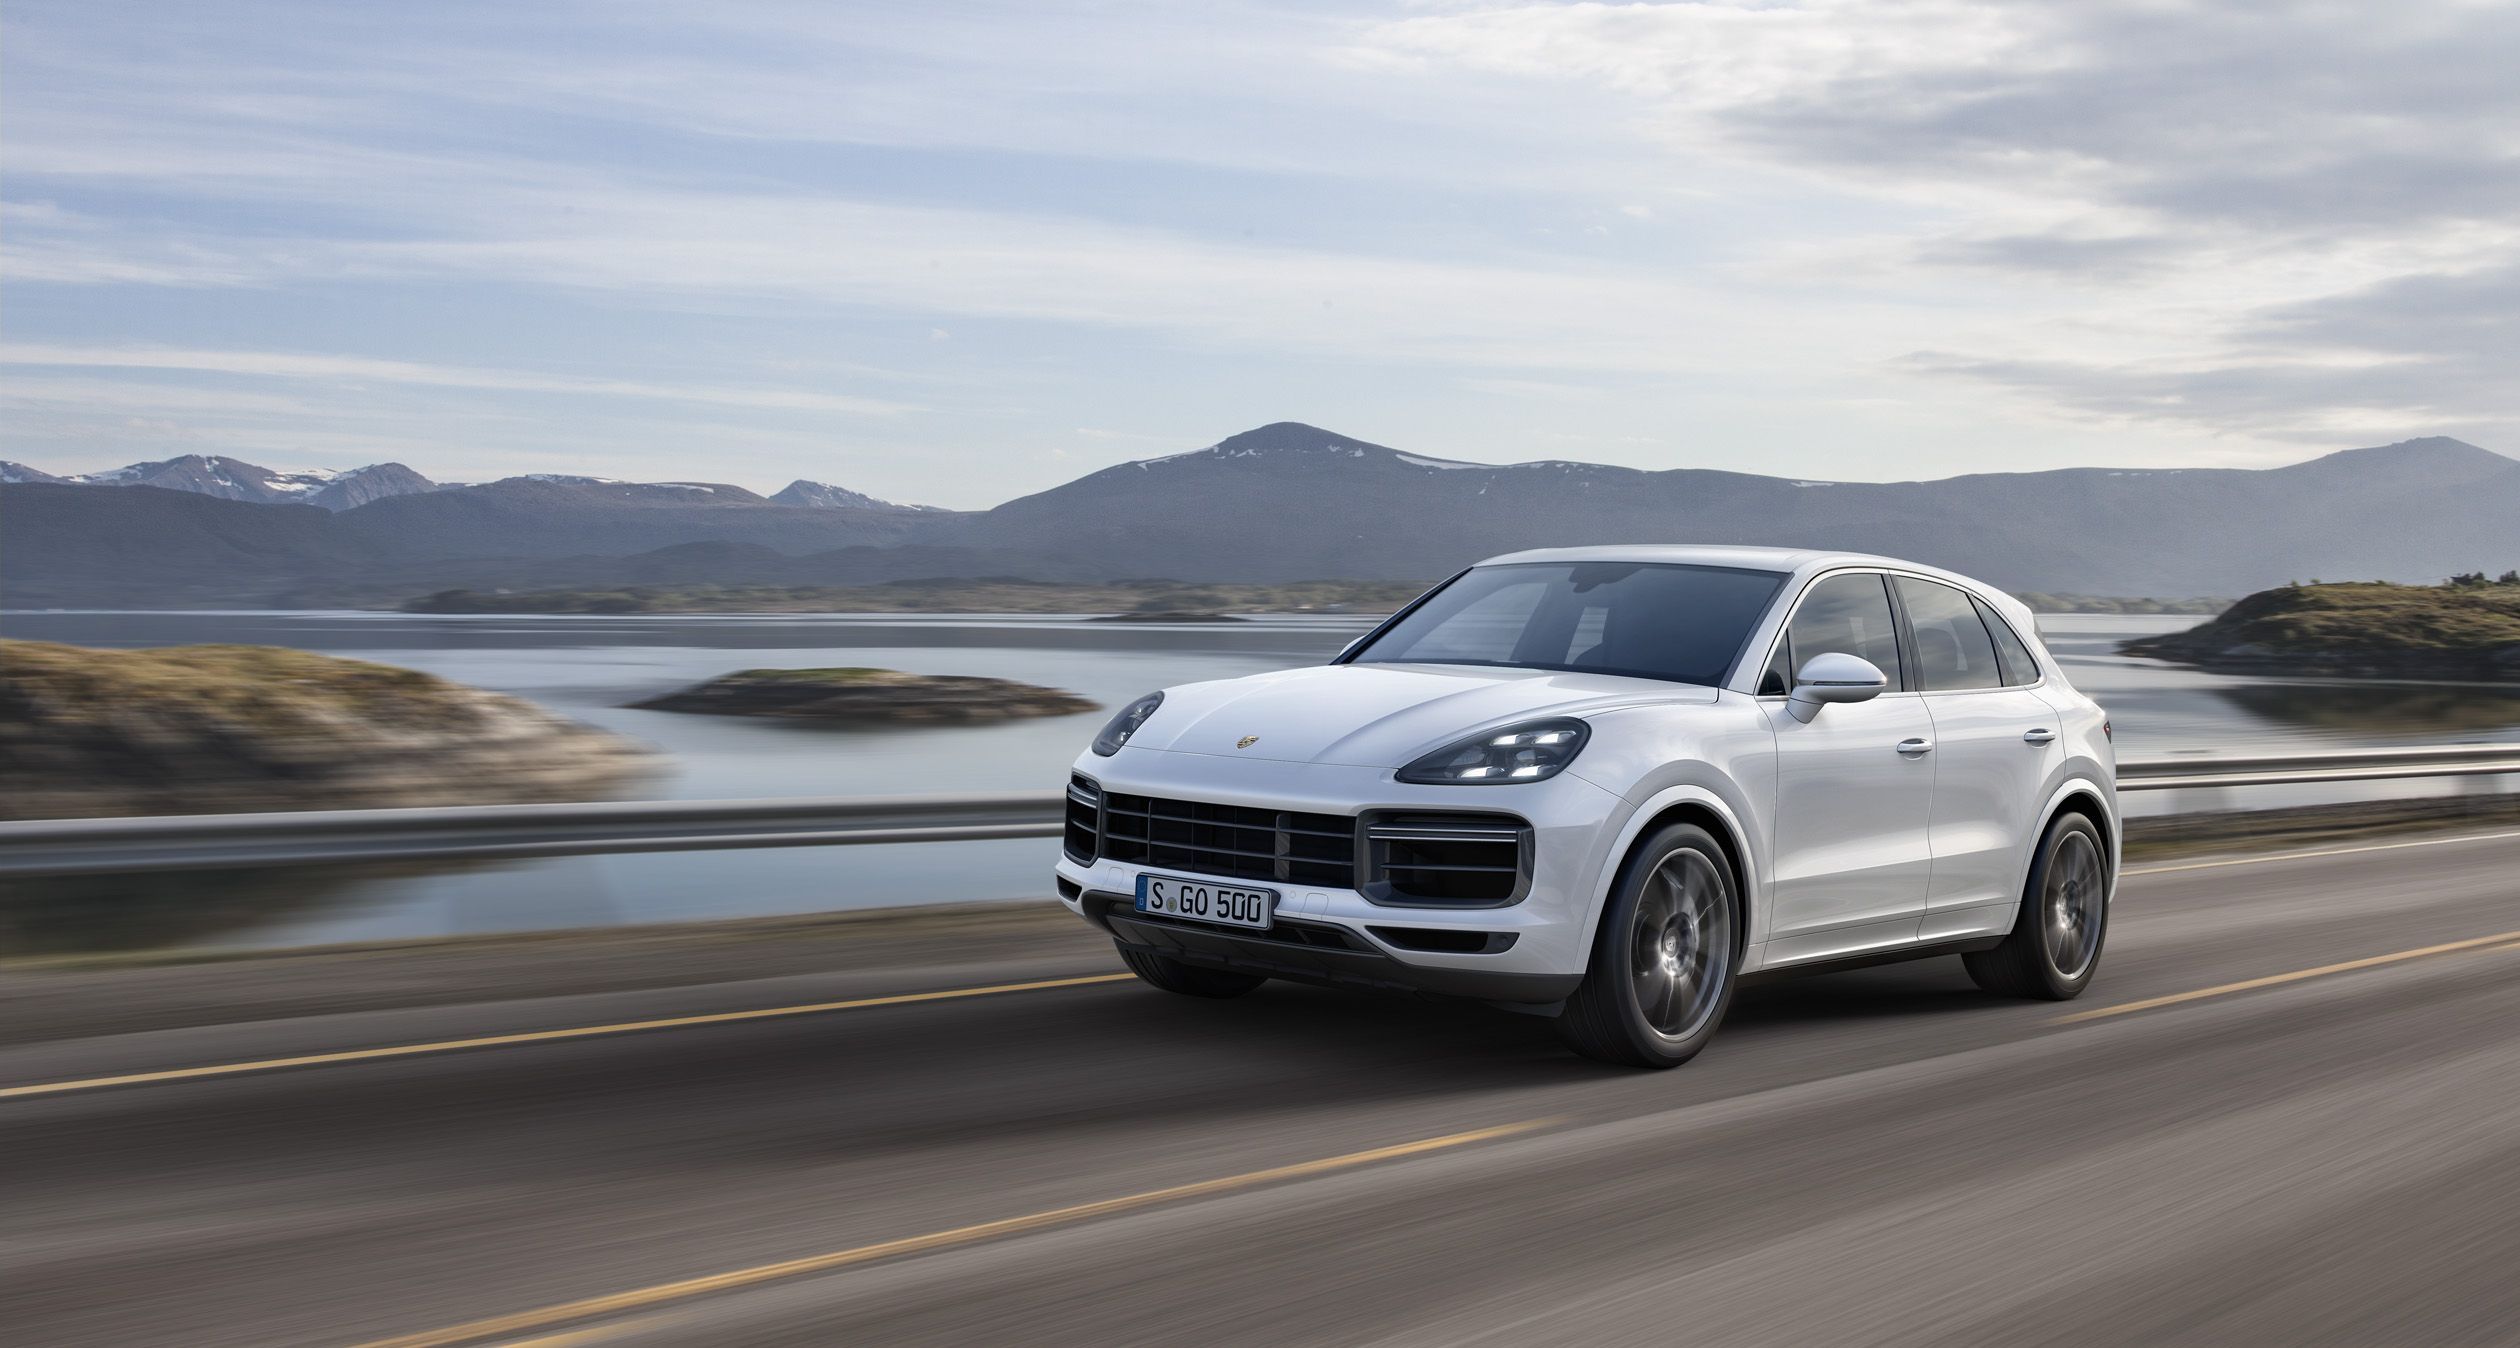 A 2019 Porsche Cayenne flying down the road